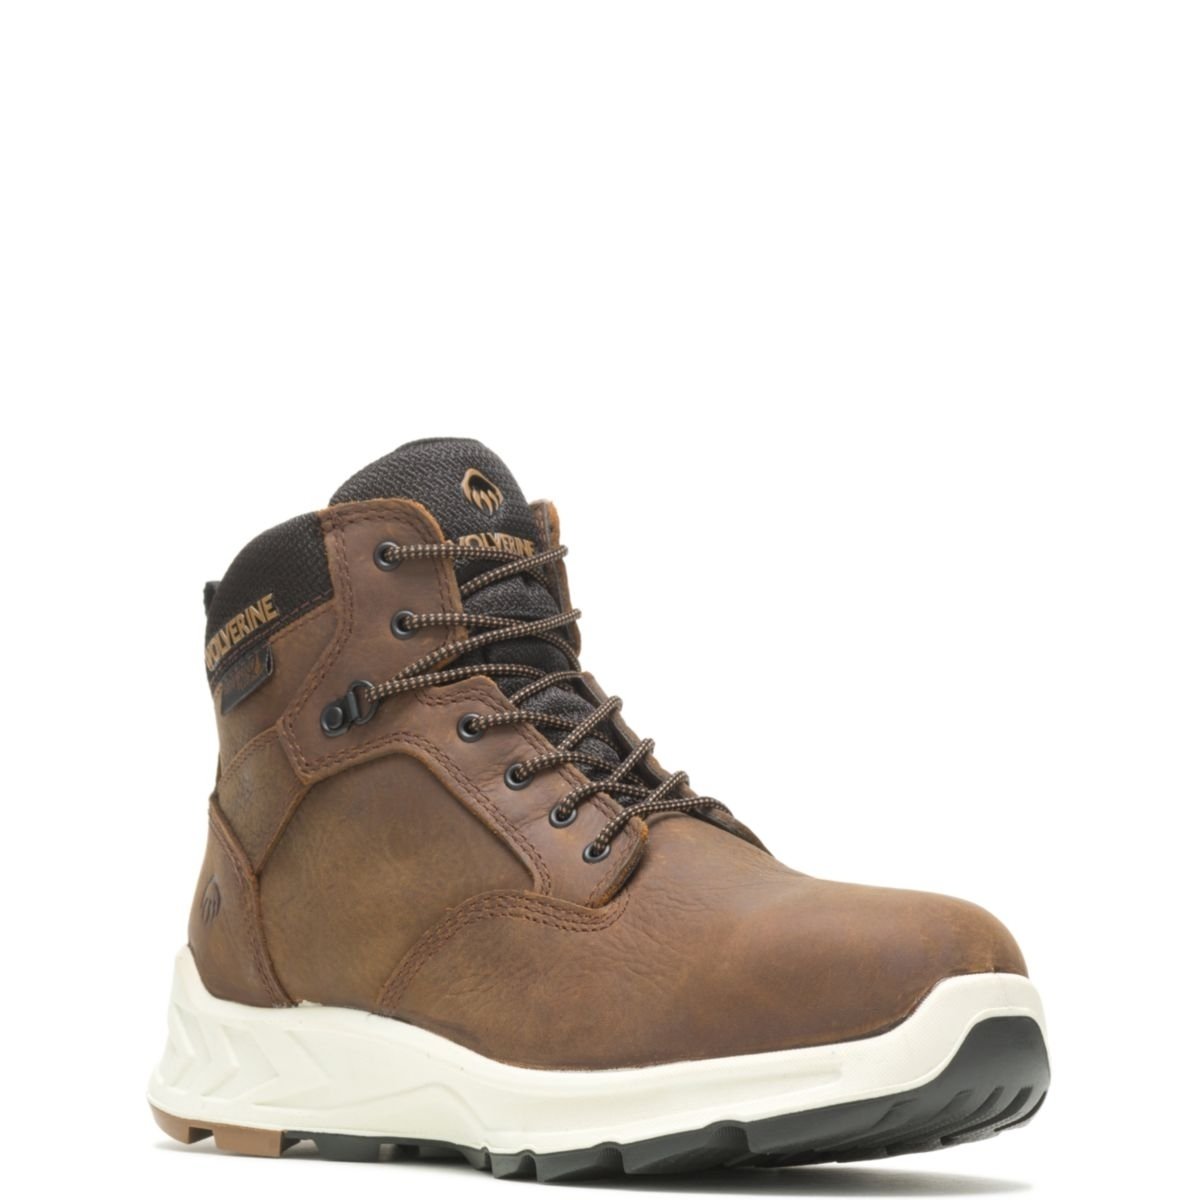 WOLVERINE Men's ShiftPlus Work LX 6 Alloy Toe Work Boot Brown - W201156 BROWN - BROWN, 9.5-M